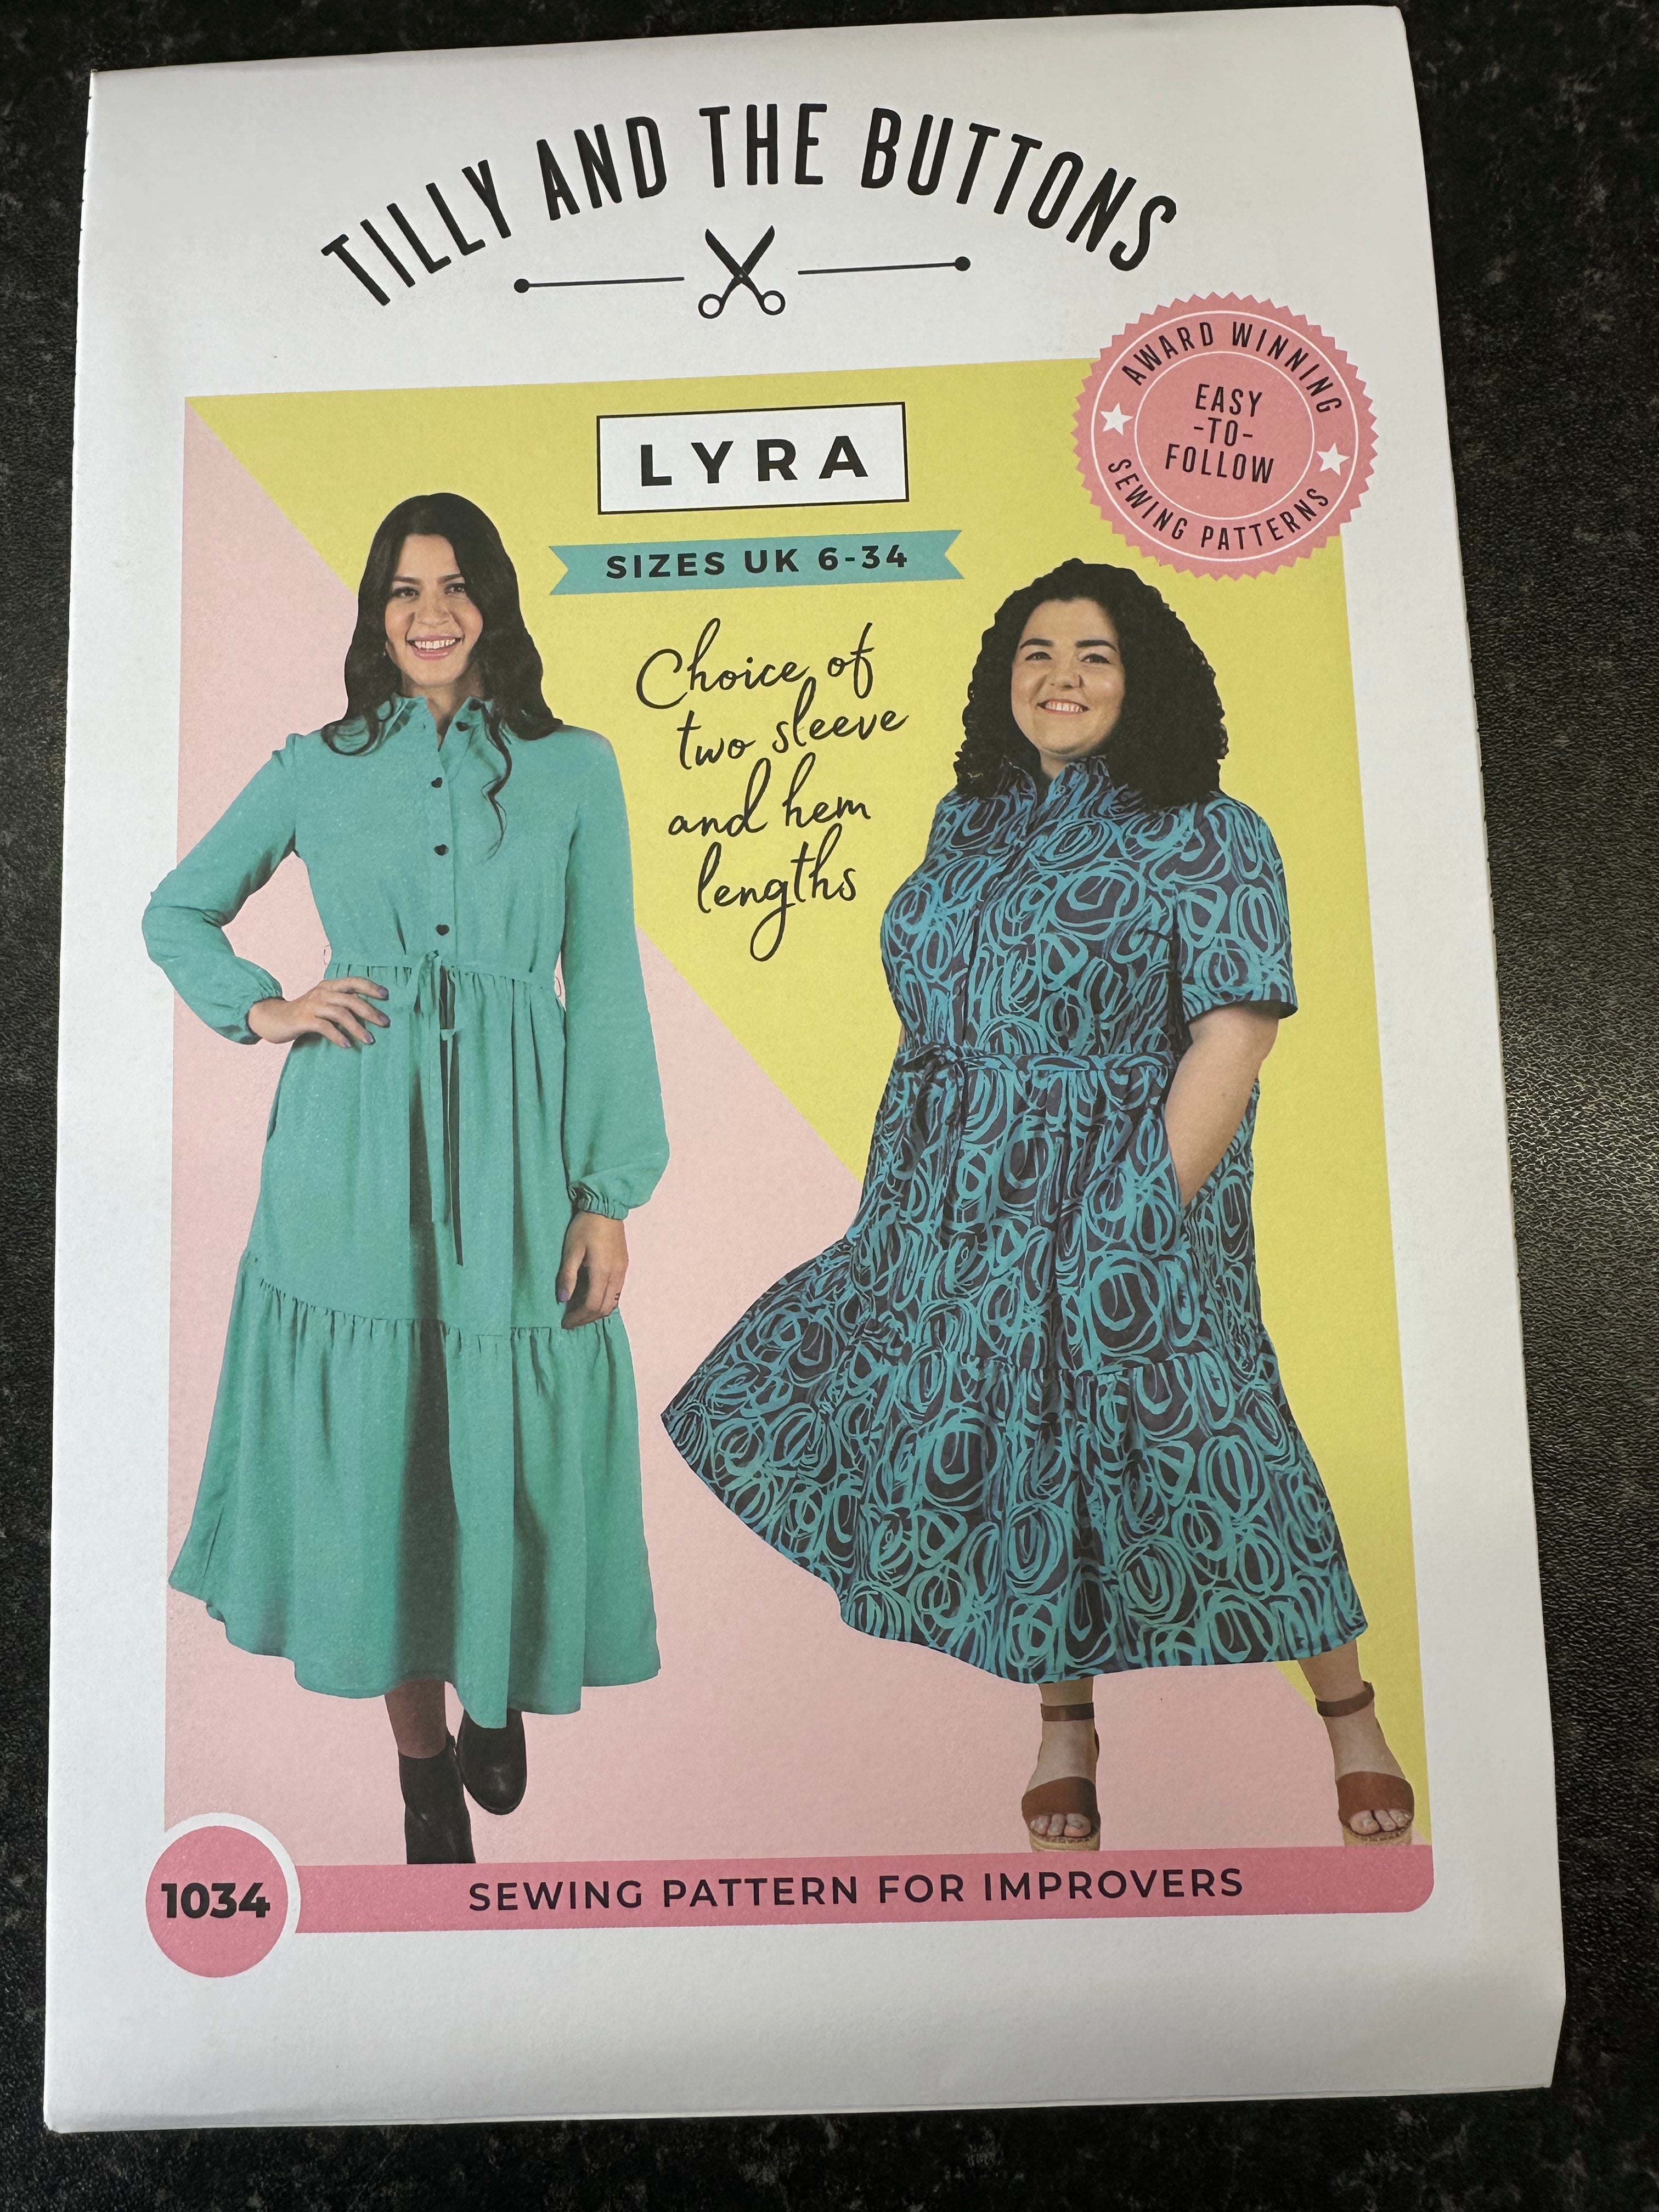 Tilly & The Buttons Lyra Sewing Pattern - size Uk 6-34